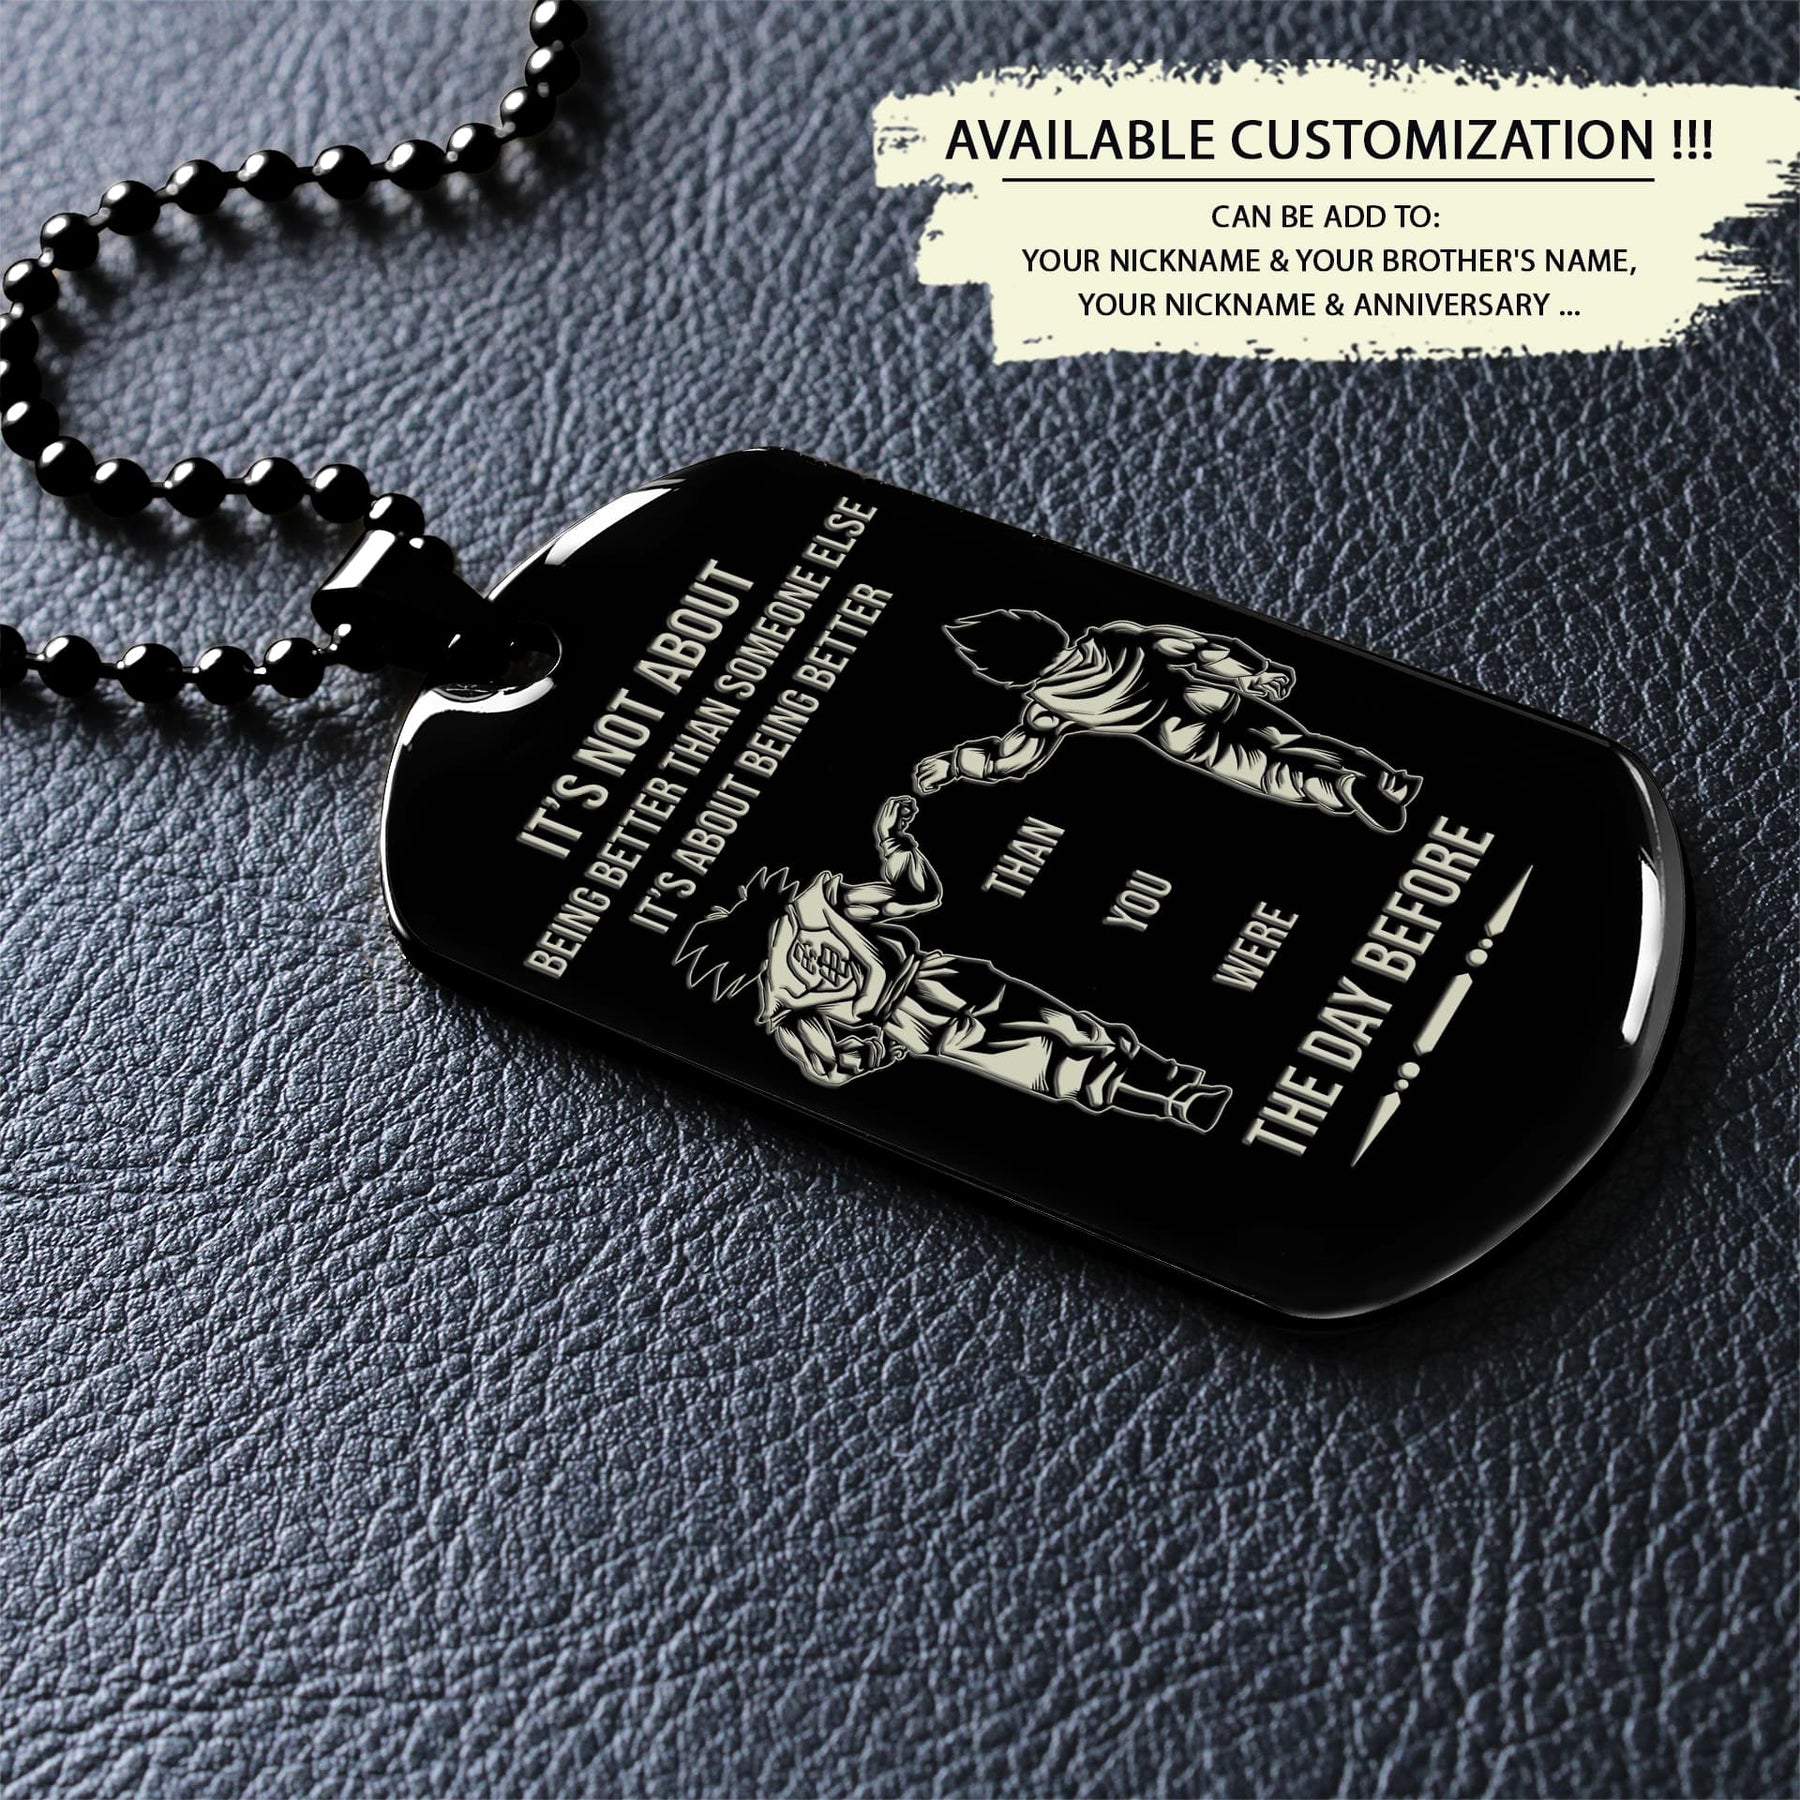 DRD033 - Call On Me Brother - It's About Being Better Than You Were The Day Before - Goku - Vegeta - Dragon Ball Dog Tag - Double Side Engrave Black Dog Tag